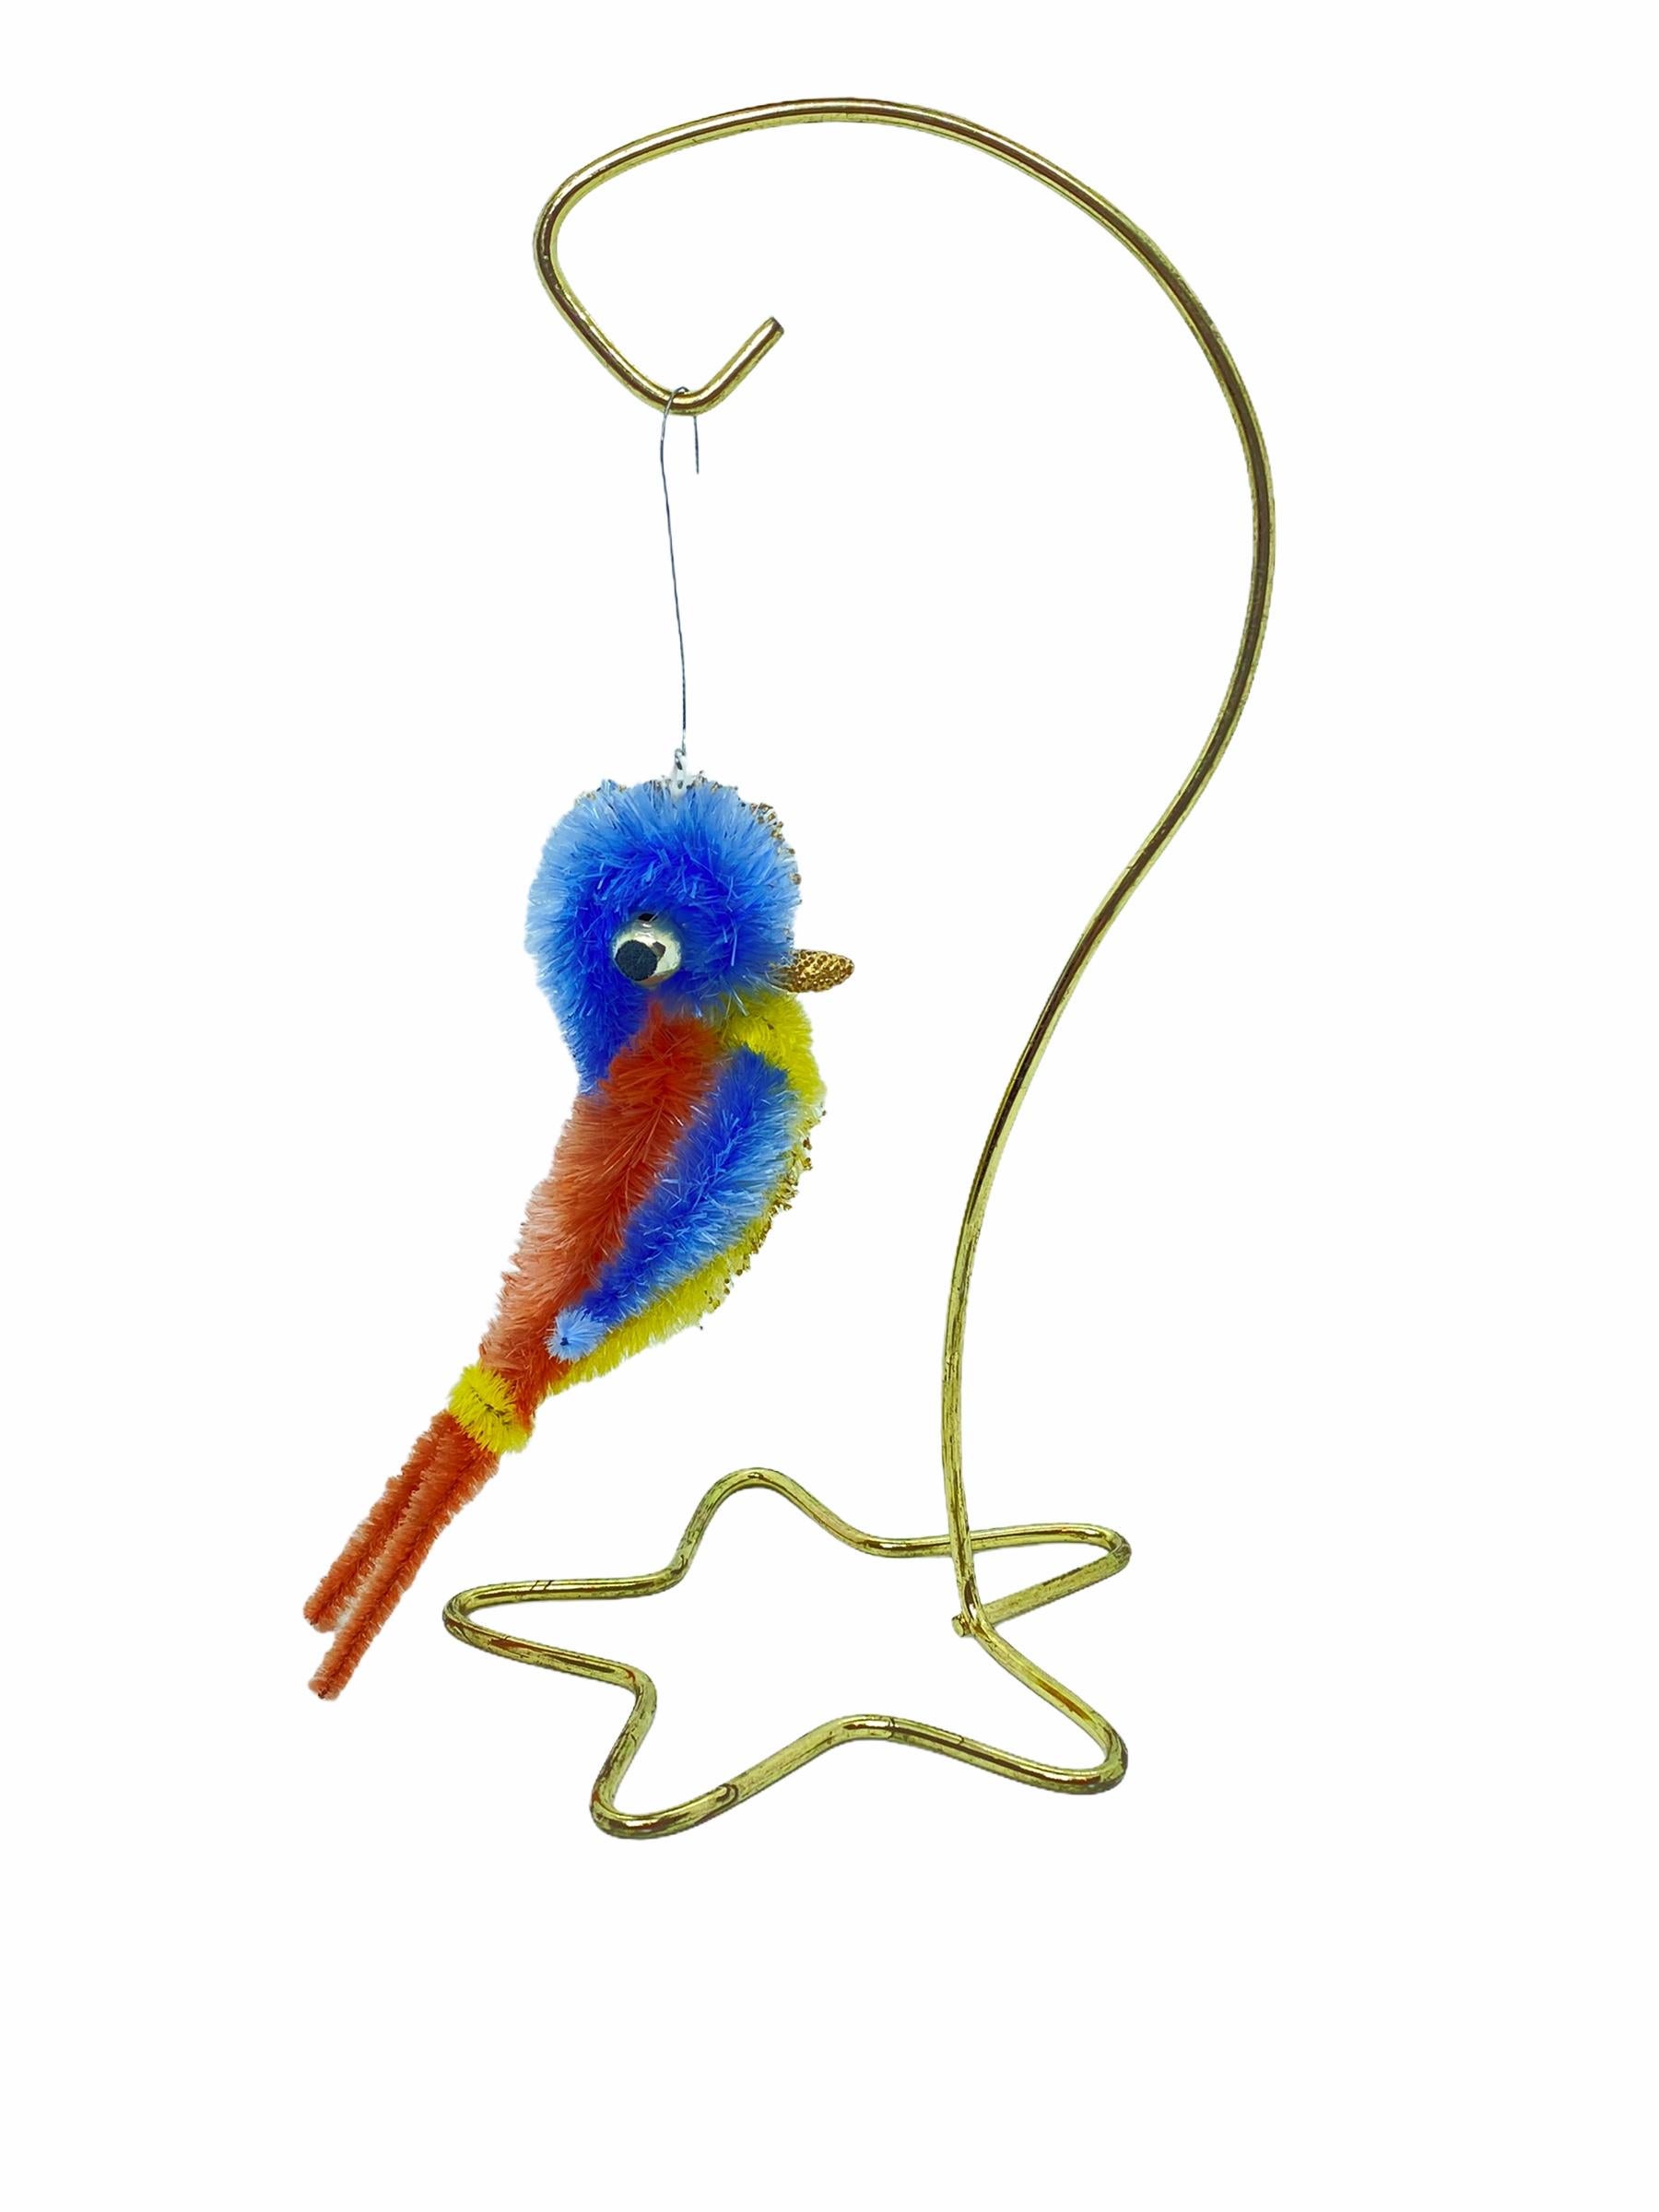 A rare Christmas ornament. It was made from Chenille, wire and glass, this would be a great antique addition for your Christmas or feather tree.
Measurements given are for the bird ornament itself (not including the wire). Stand is not included in